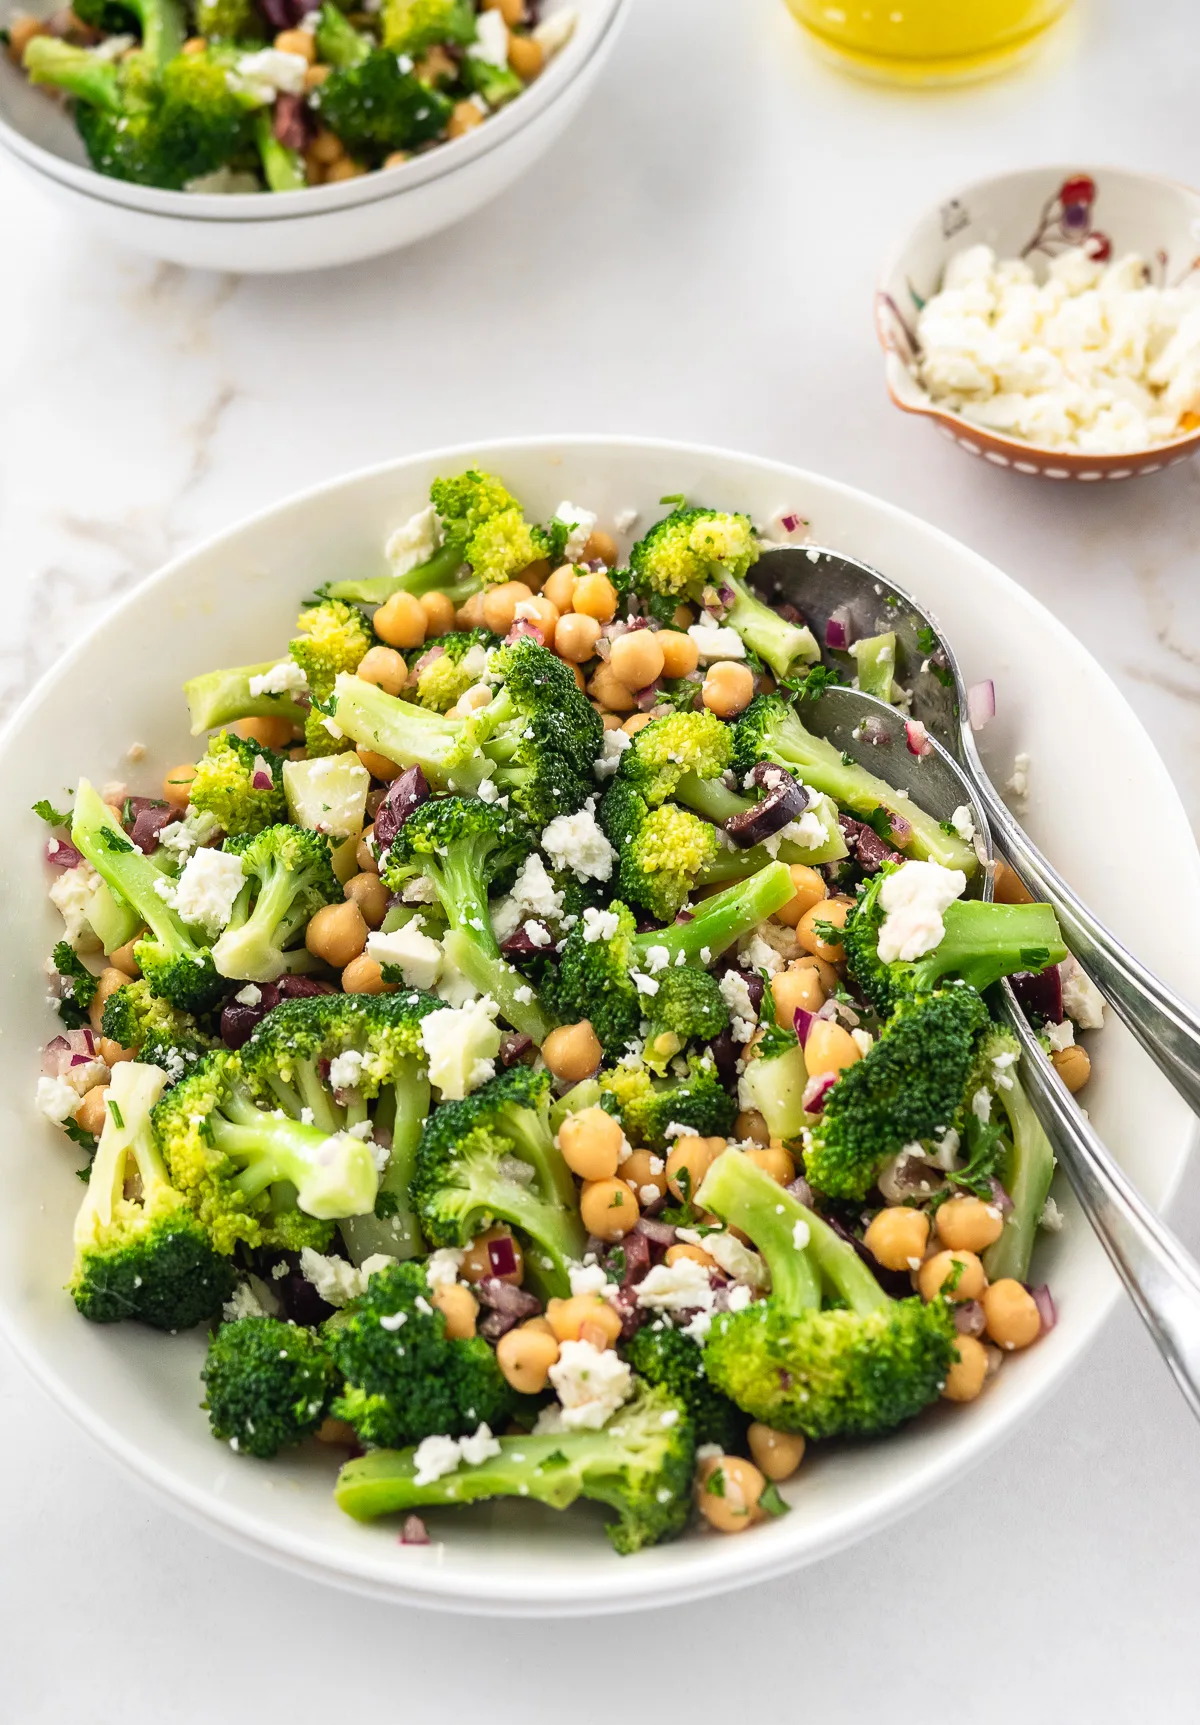 Bowl of chickpea and broccoli salad topped with crumble Feta cheese.